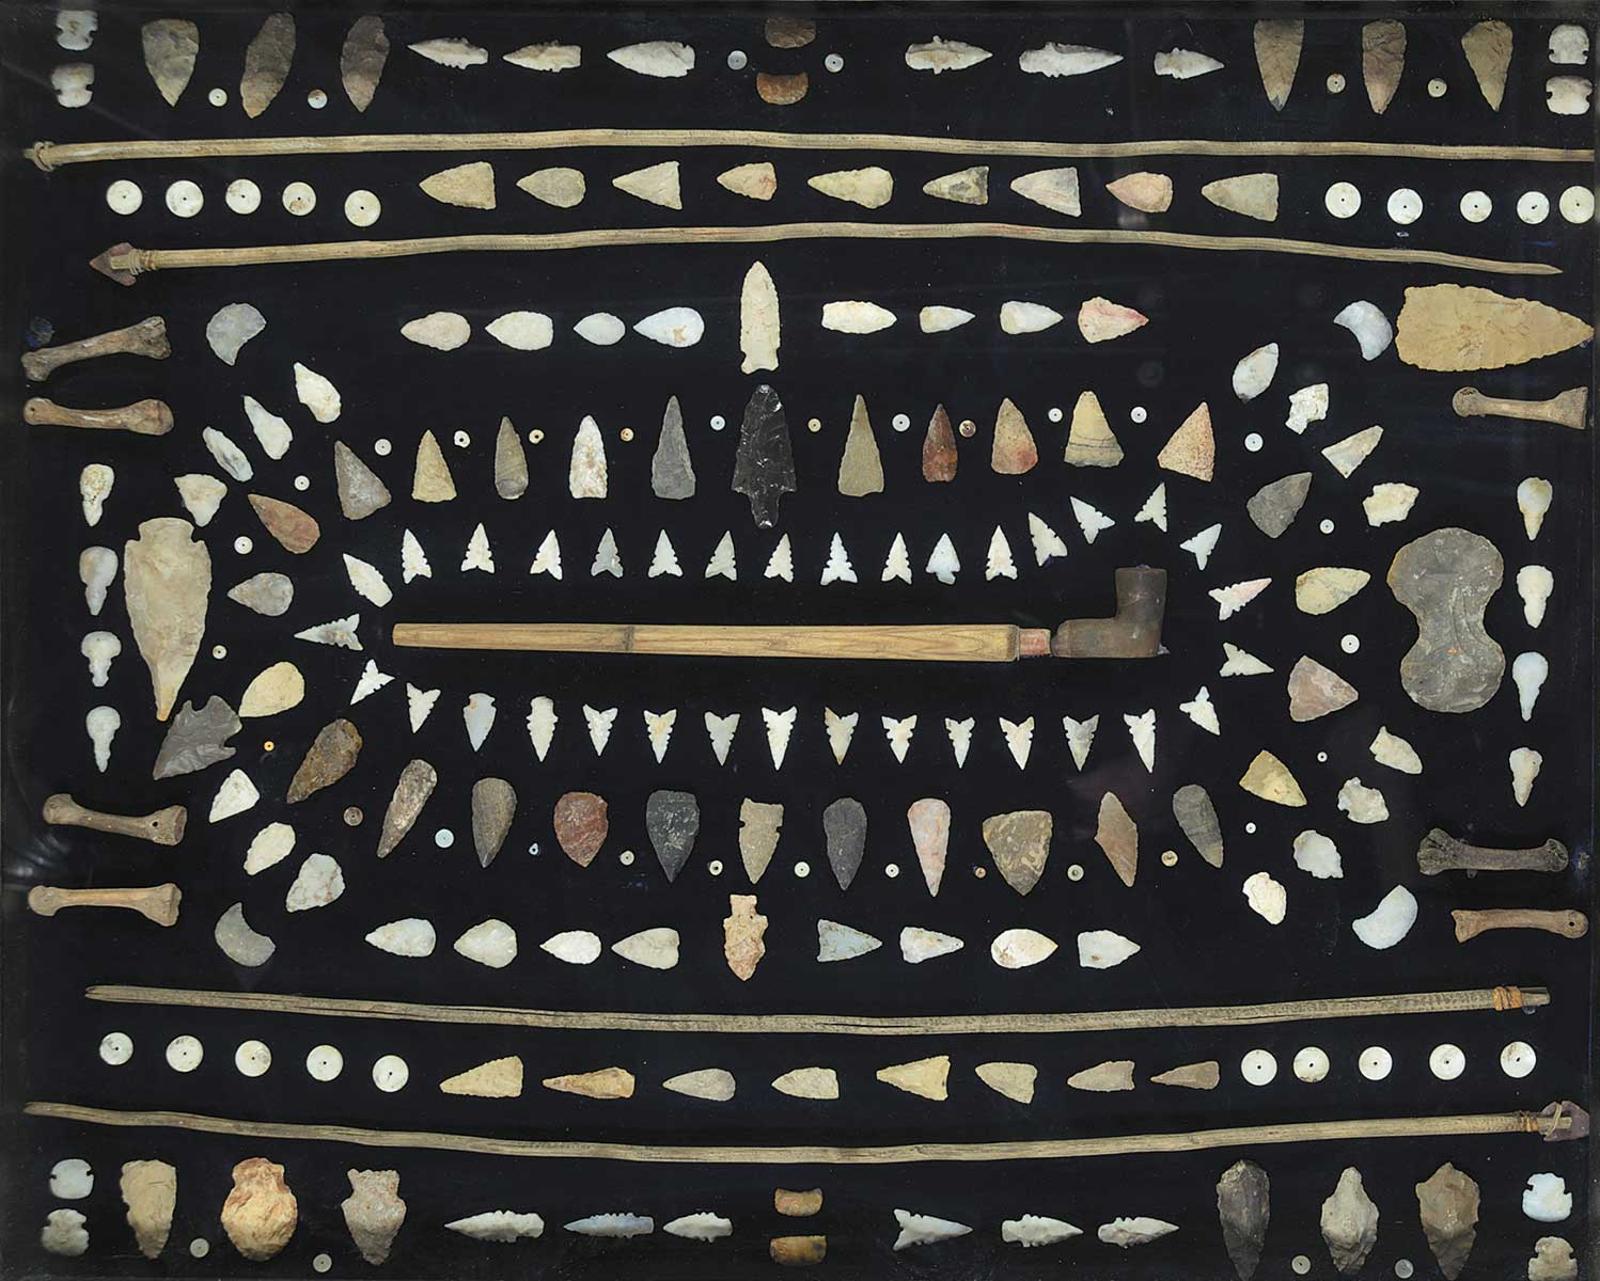 First Nations Basket School - Collection of Arrowheads, Arrows, Buttons and Pipe